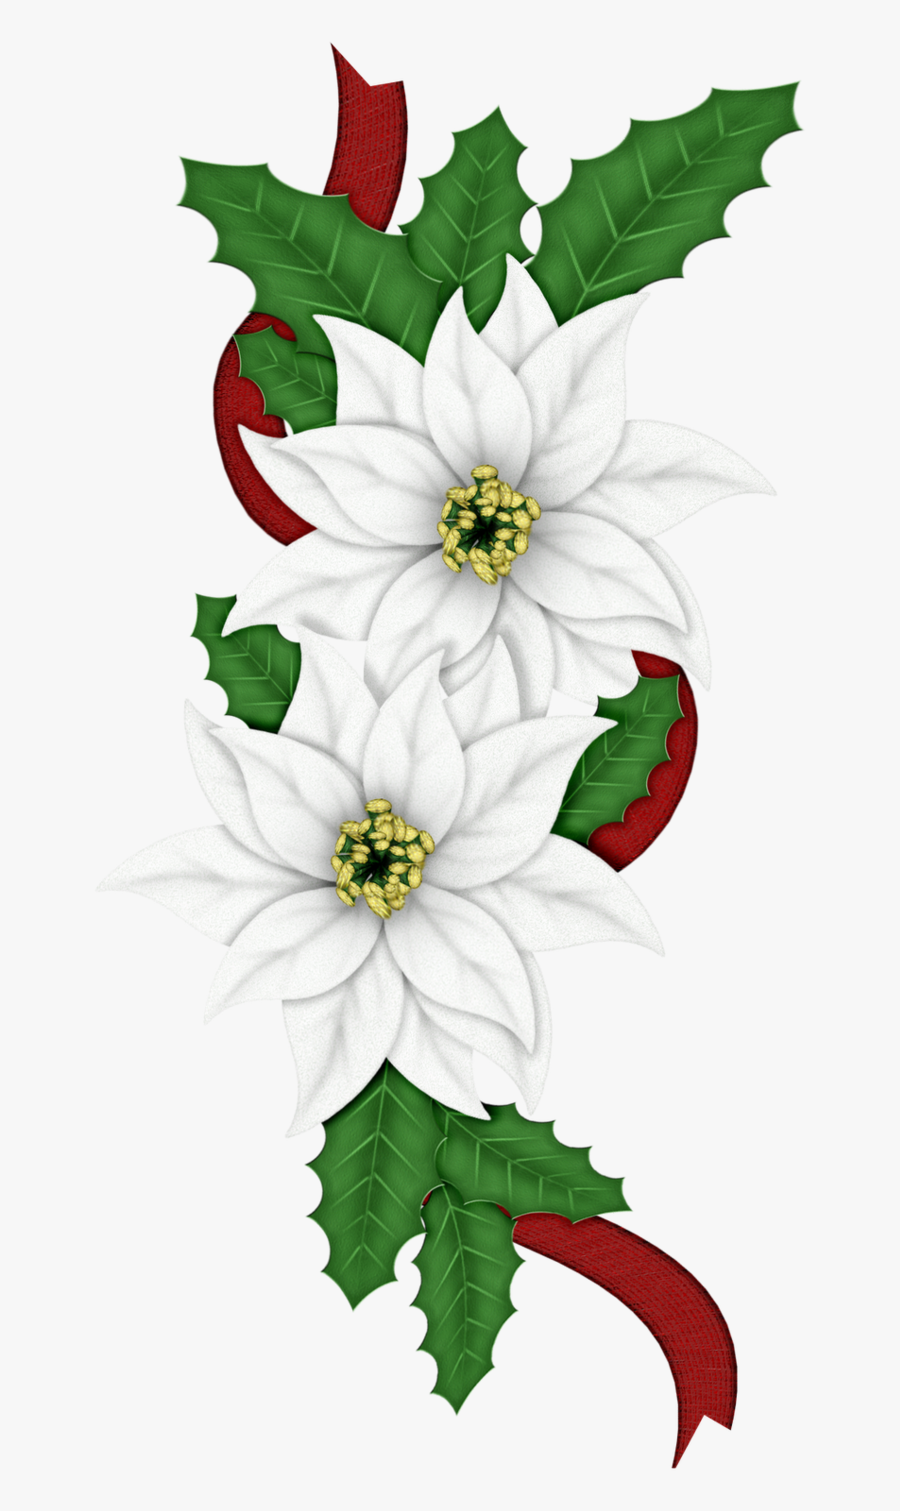 66300 - Edelweiss Png Clipart, Transparent Clipart